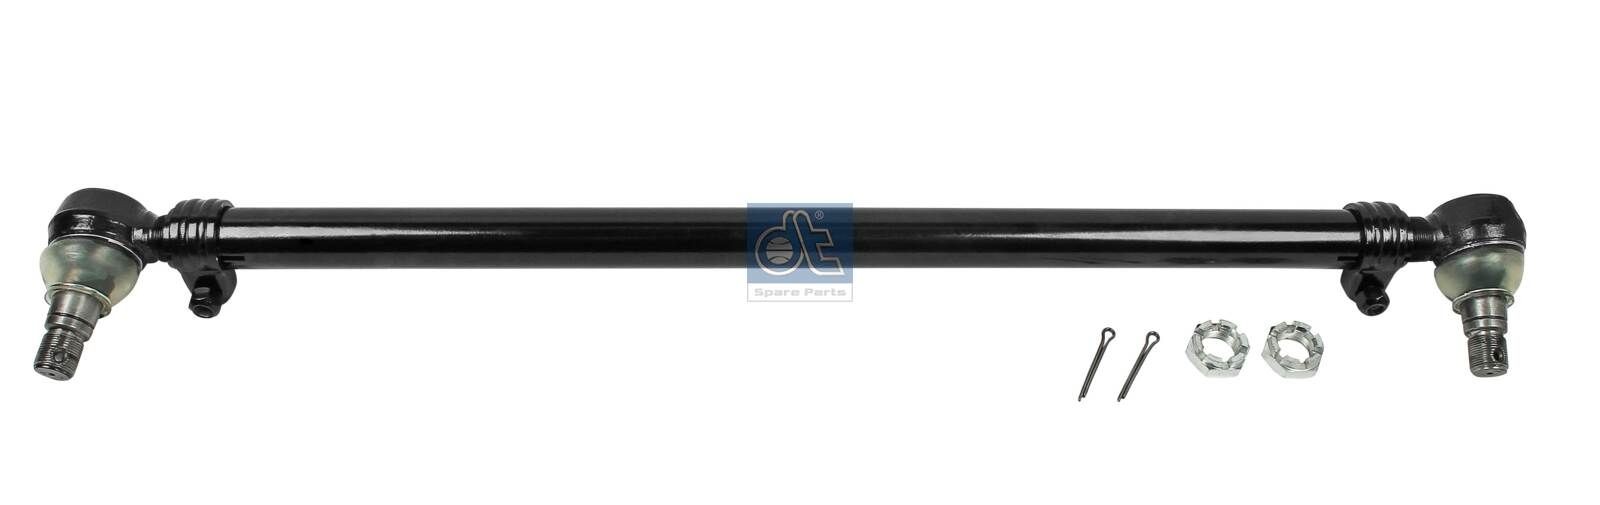 Original 4.65664 DT Spare Parts Inner tie rod experience and price